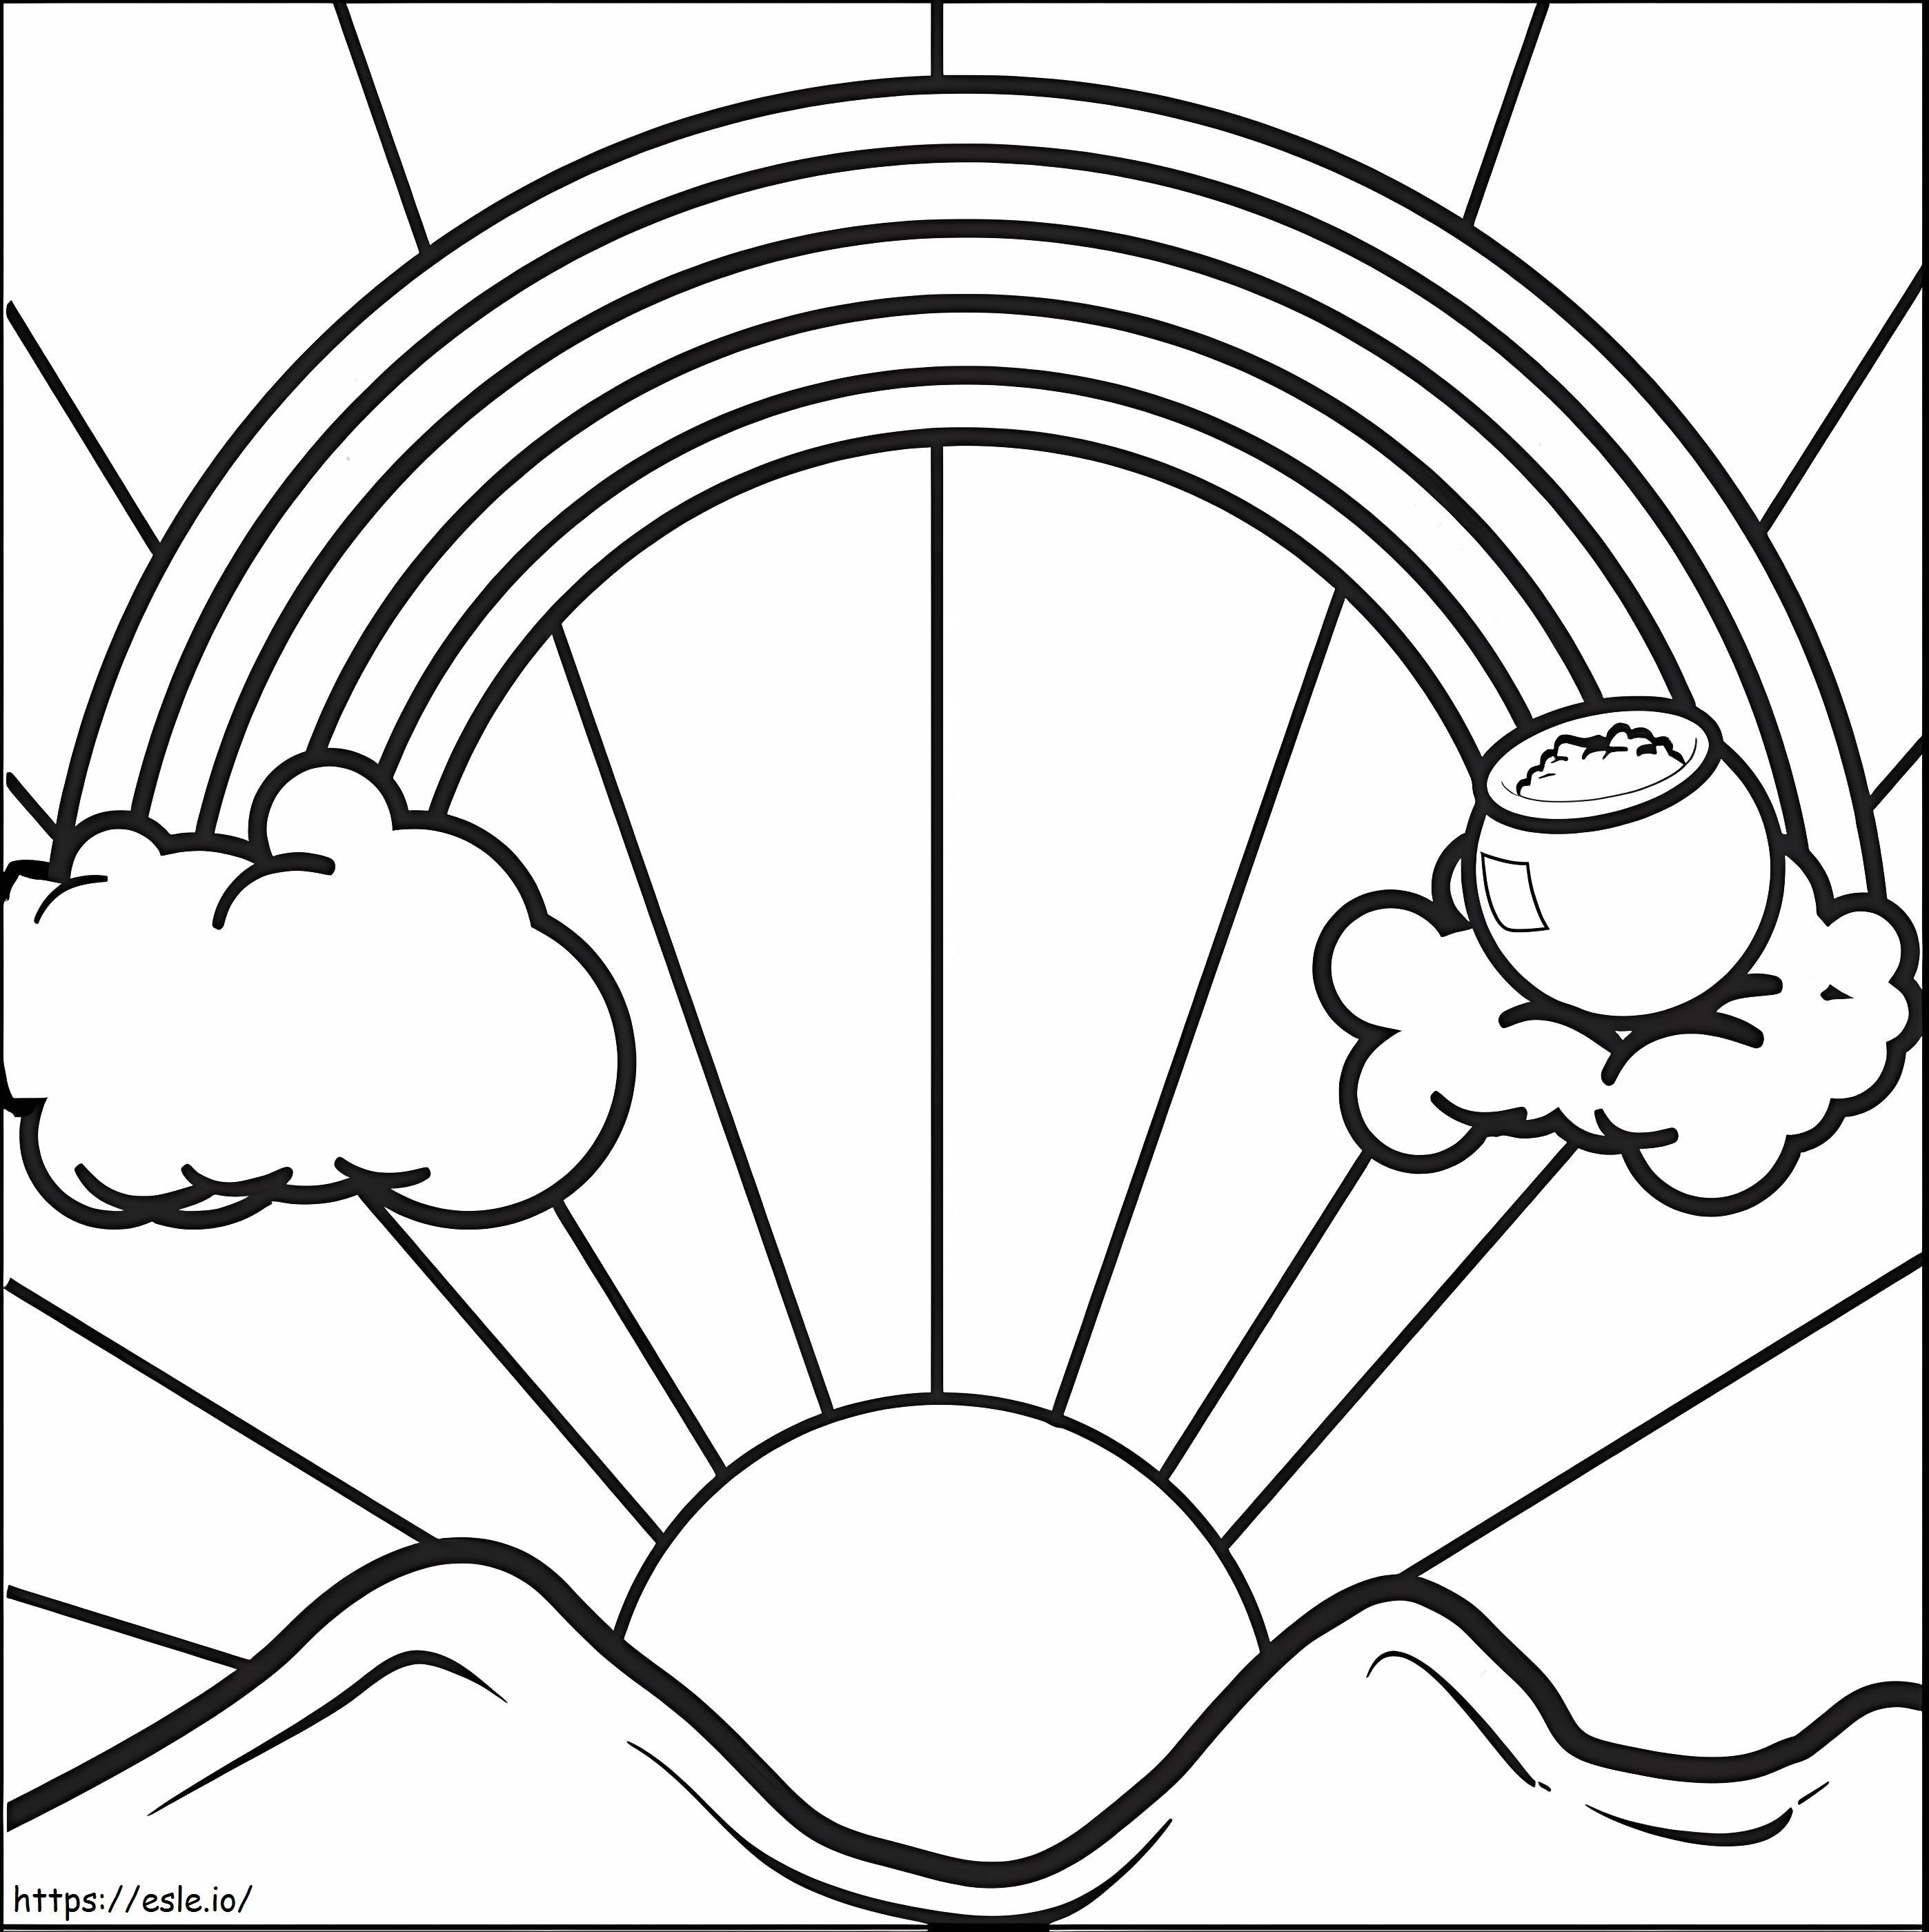 Pot Of Gold 16 coloring page